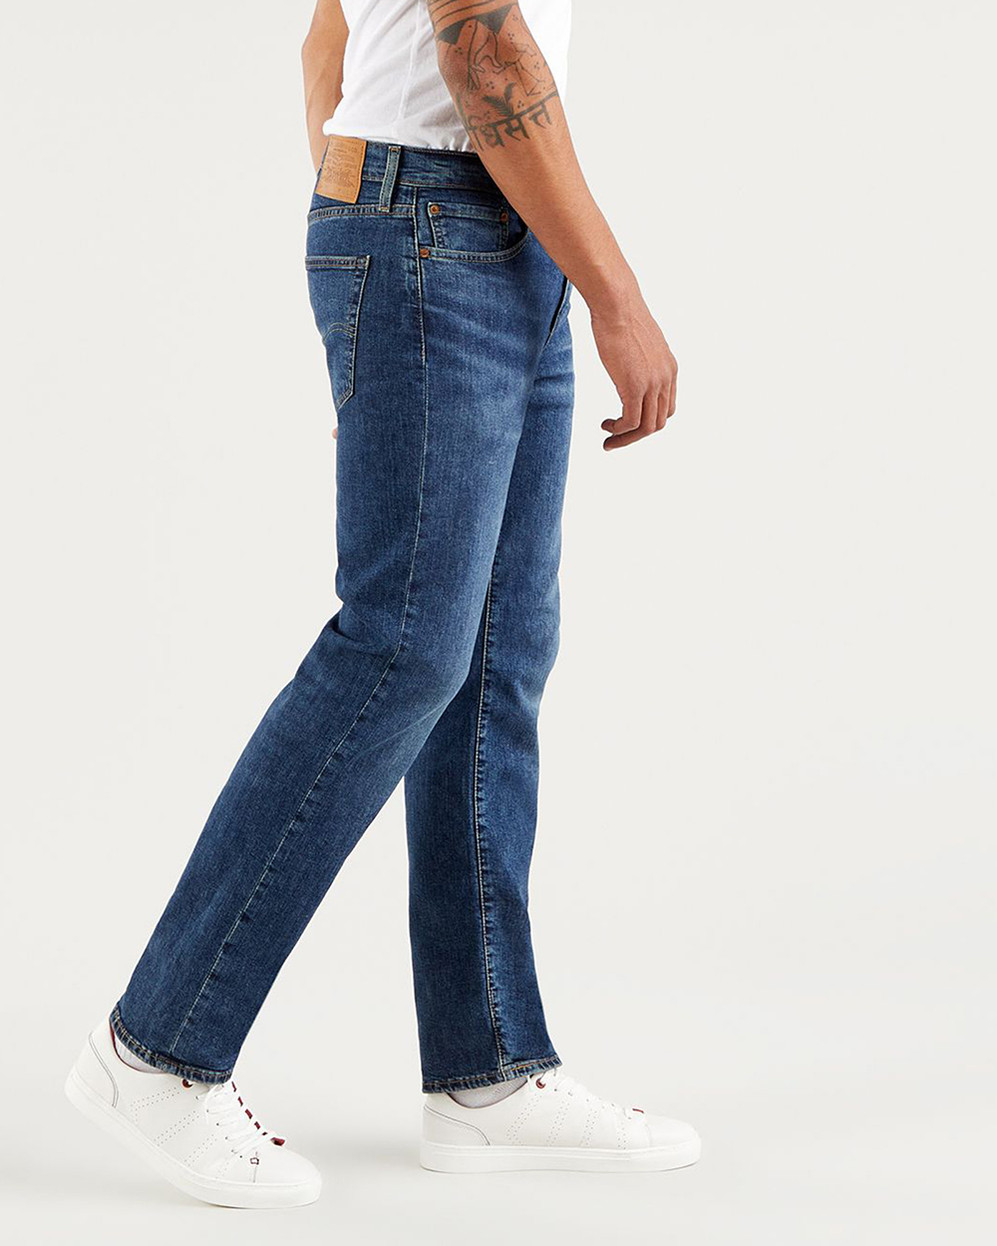 Levi's® 514 Relaxed Straight Mens Jeans - Fun Times ADV | JEANSTORE